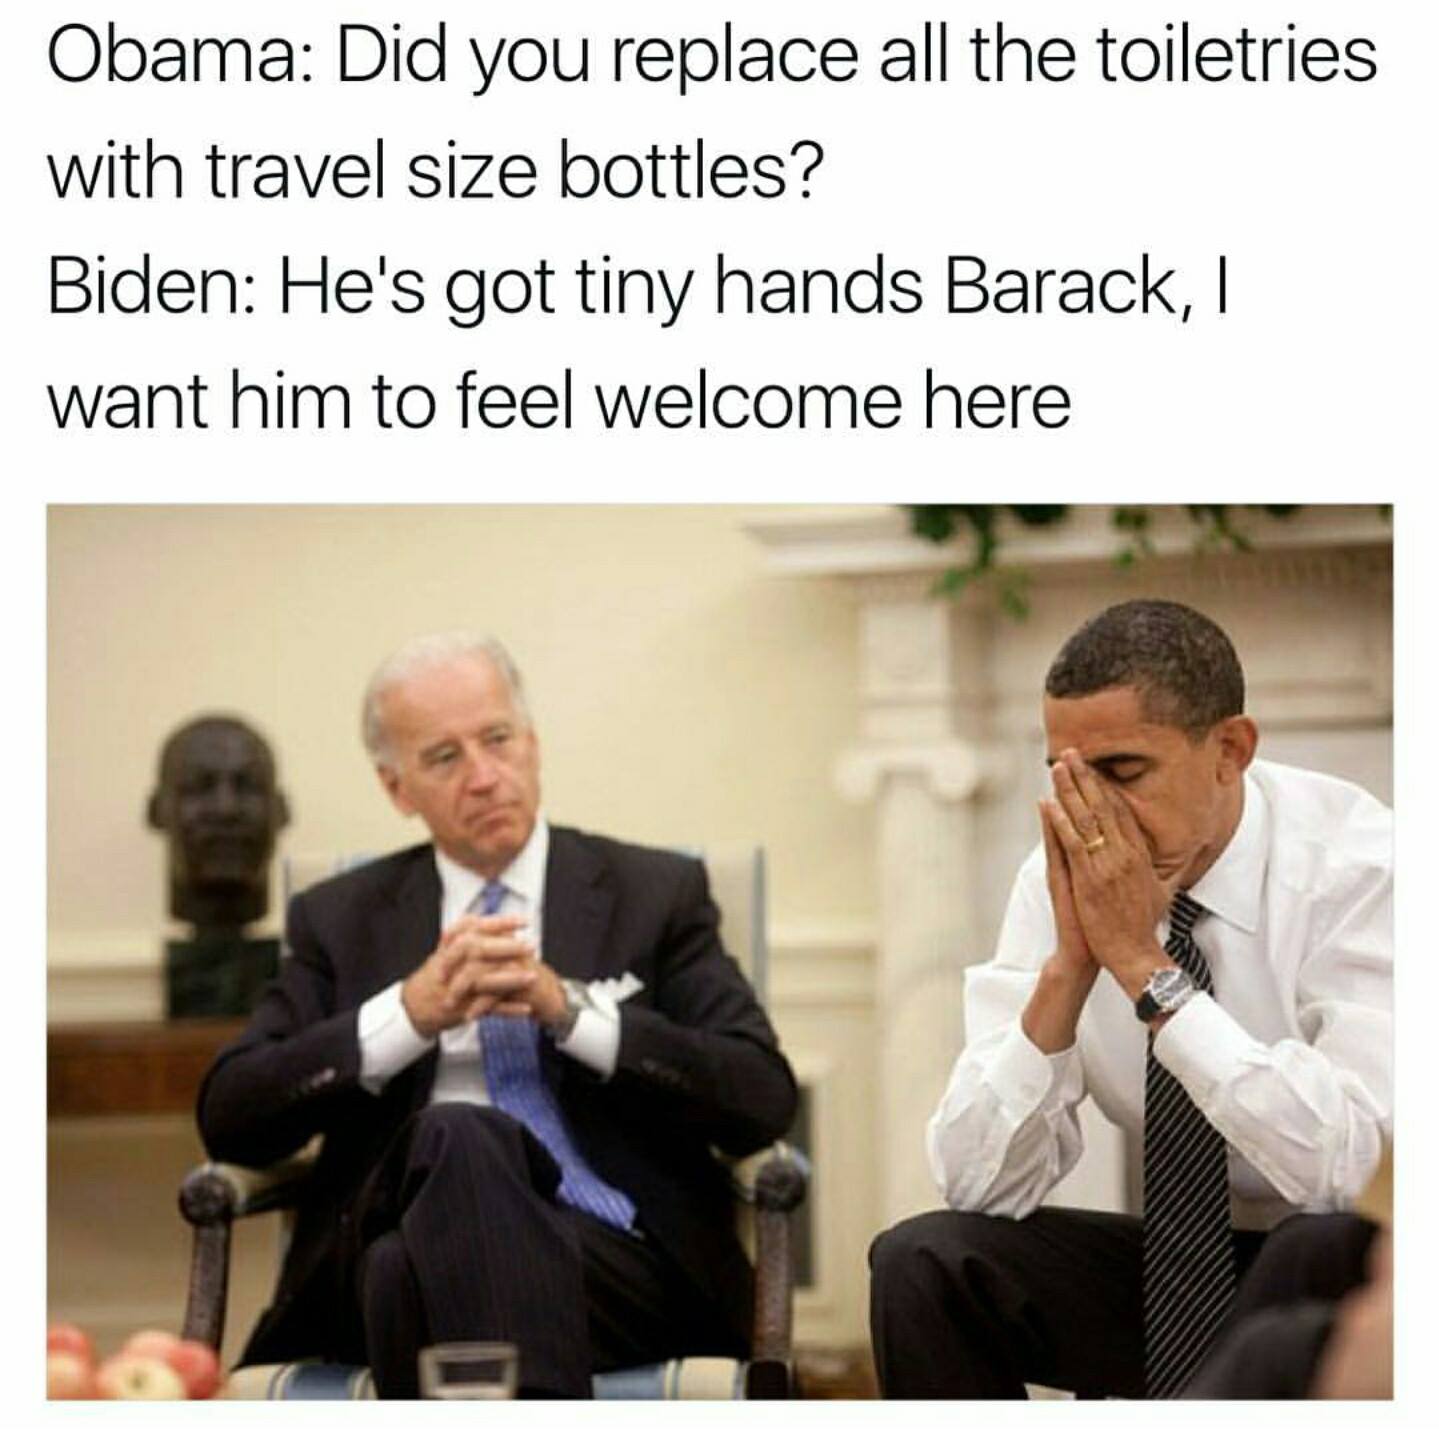 joe biden and obama meme trump - Obama Did you replace all the toiletries with travel size bottles? Biden He's got tiny hands Barack, I want him to feel welcome here